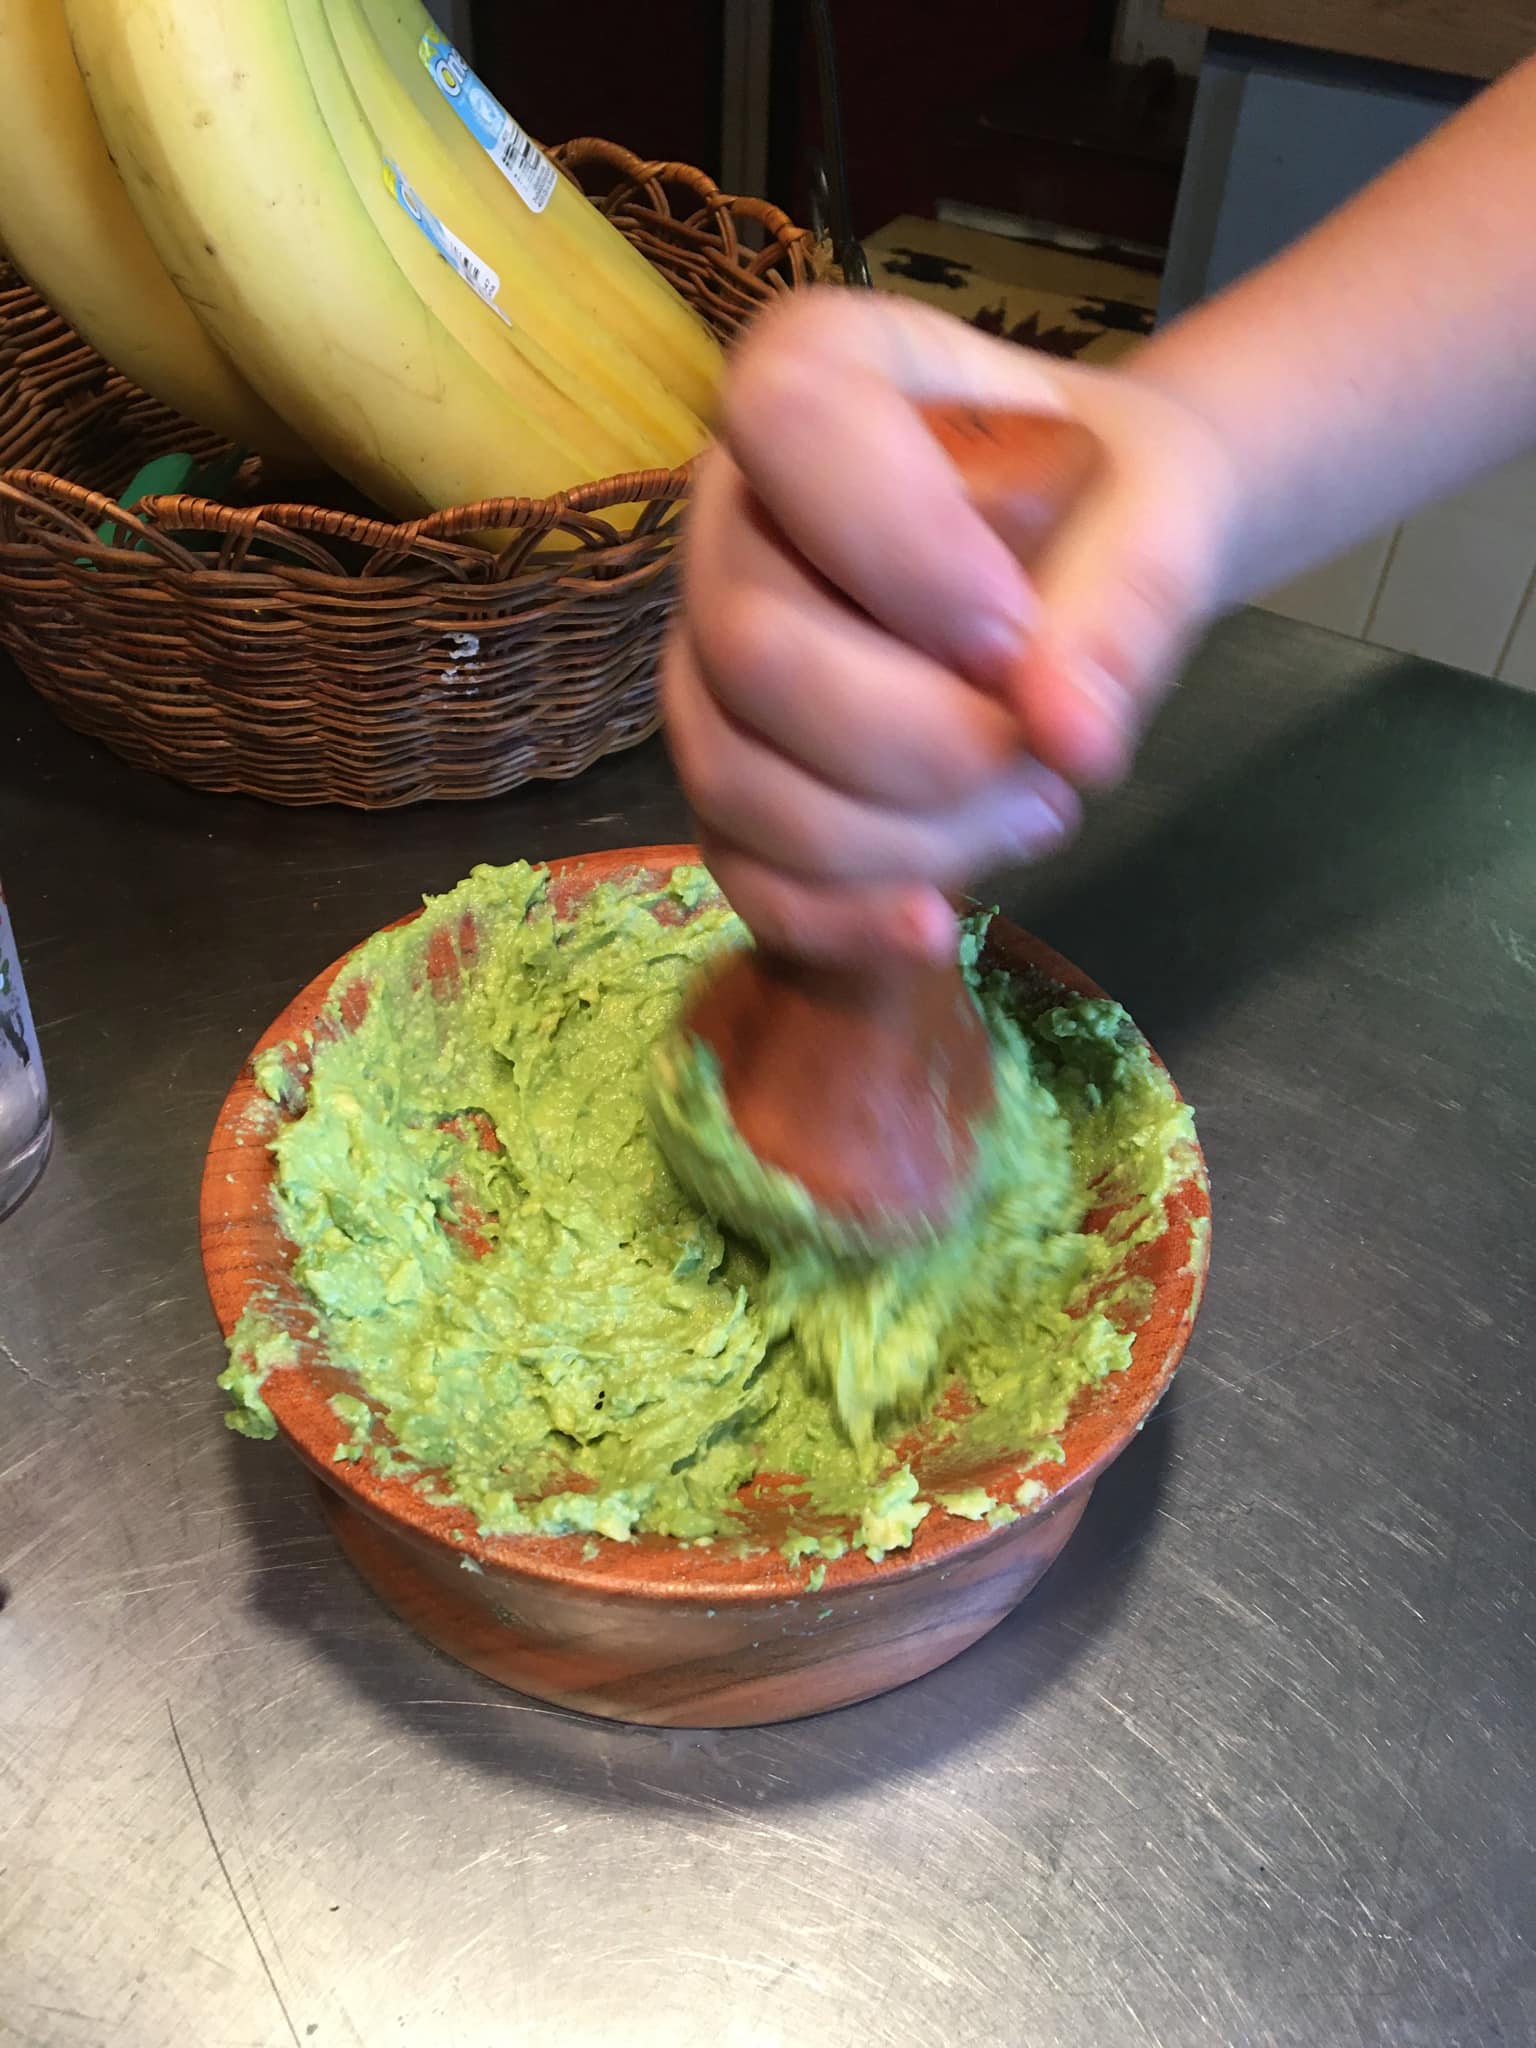 Using a wooden mortar and pestle, a person handcrafts guacamole, utilizing this culinary tool to squeeze the green mixture into a bowl.